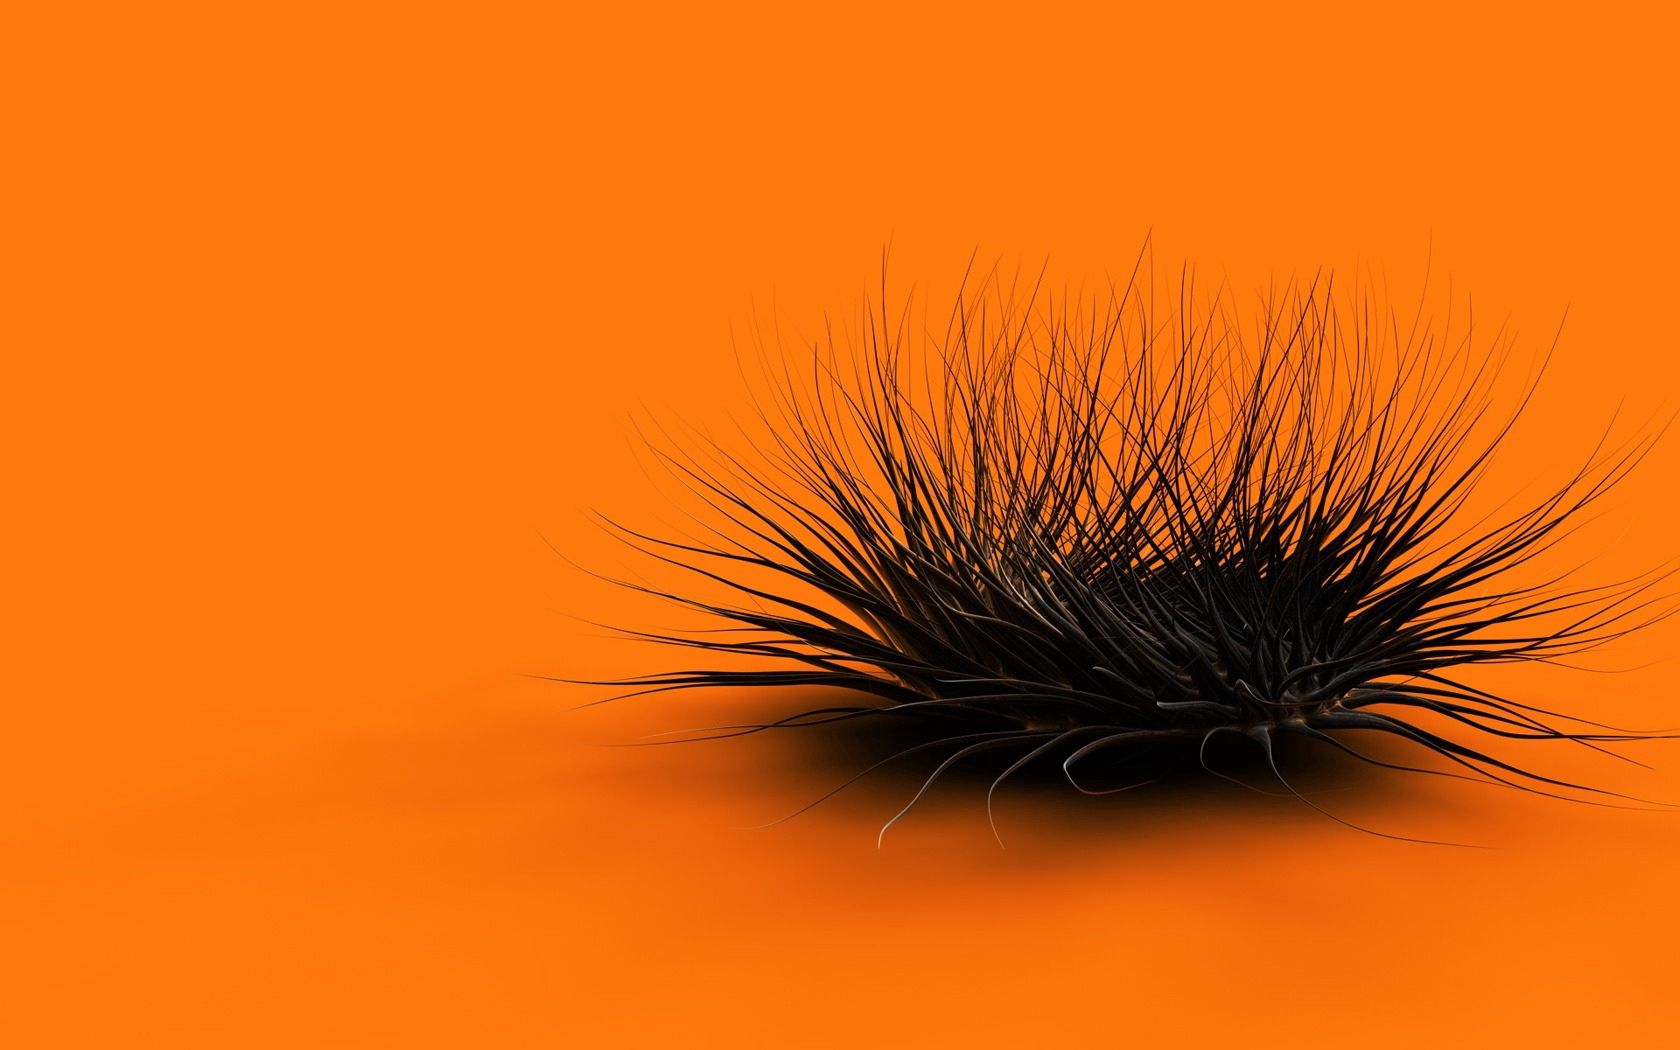 Wallpaper for mobile devices black, fuzz, fluff, 3d